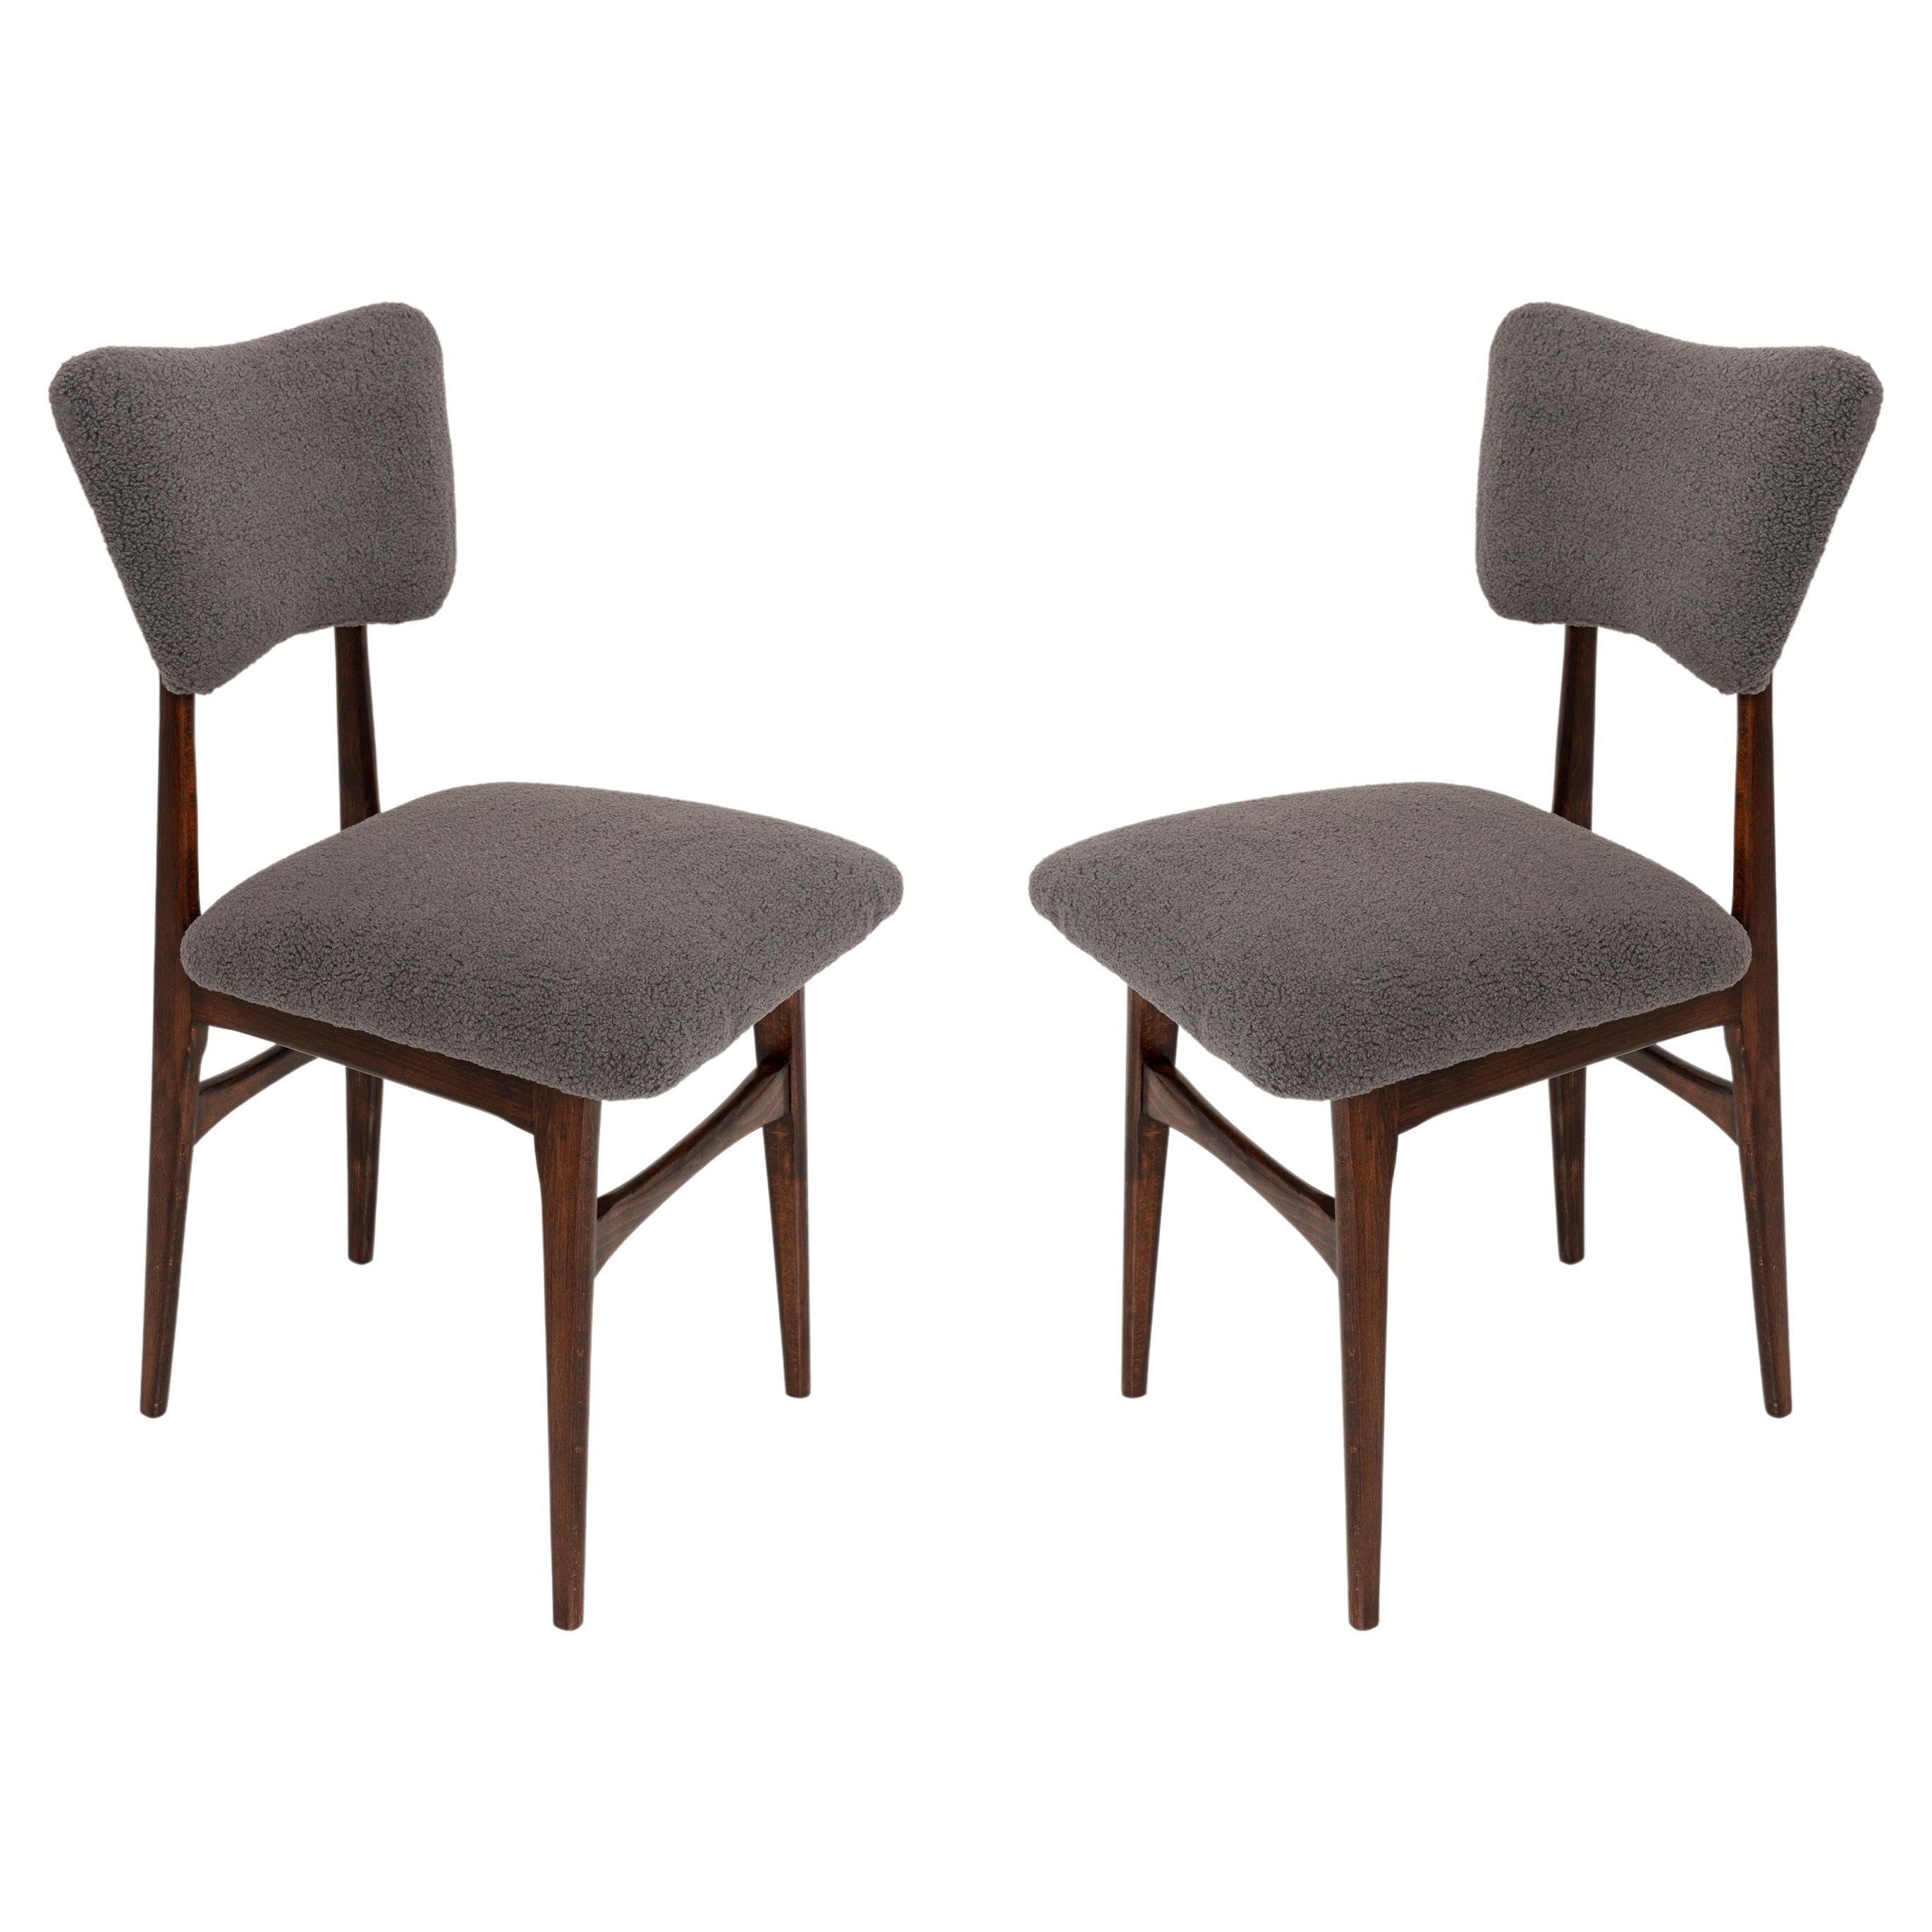 Set of Two 20th Century Chairs in Dark Boucle, Europe, 1960s